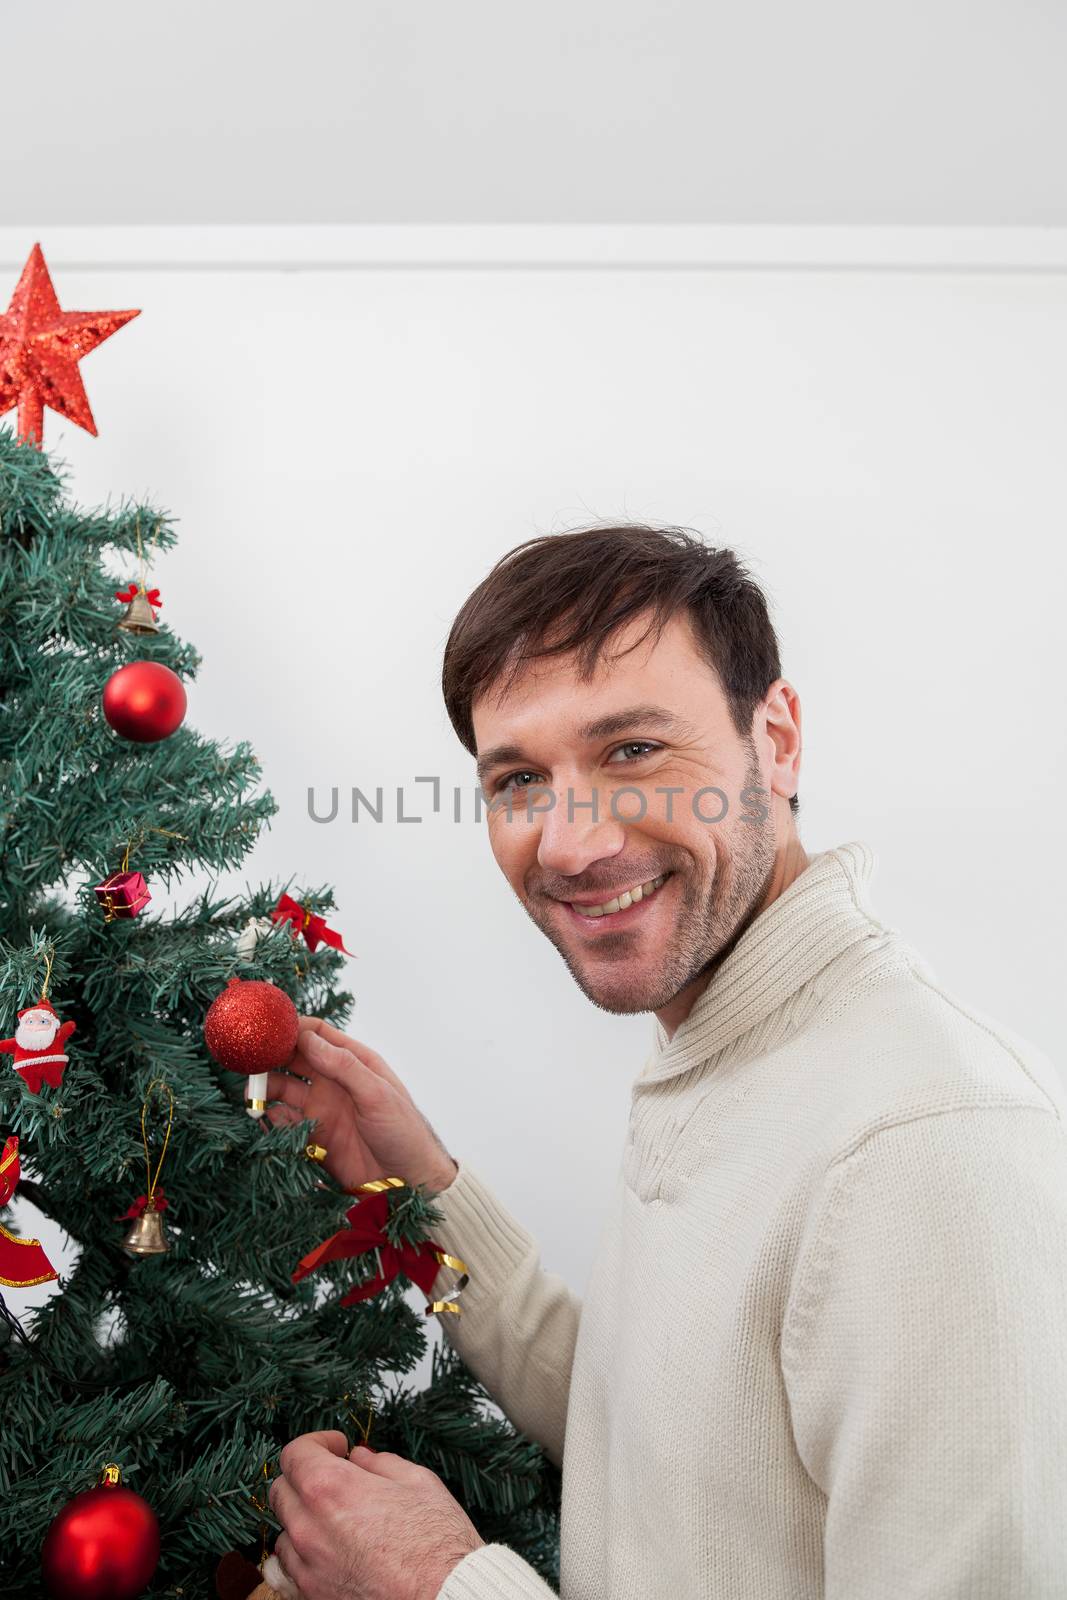 30-35, adult, artificial, background, balls, brown, caucasian, celebration, christmas, decorating, decorations, eyes, festive, garland, green, handsome, happy, holiday, male, man, men, model, old, ornaments, person, pine, pleasure, property, red, releases, santa, seasonal, smiling, sweater, tall, tradition, tree, vertical, white, winter, xmas, years, young, look, looking, camera, smile